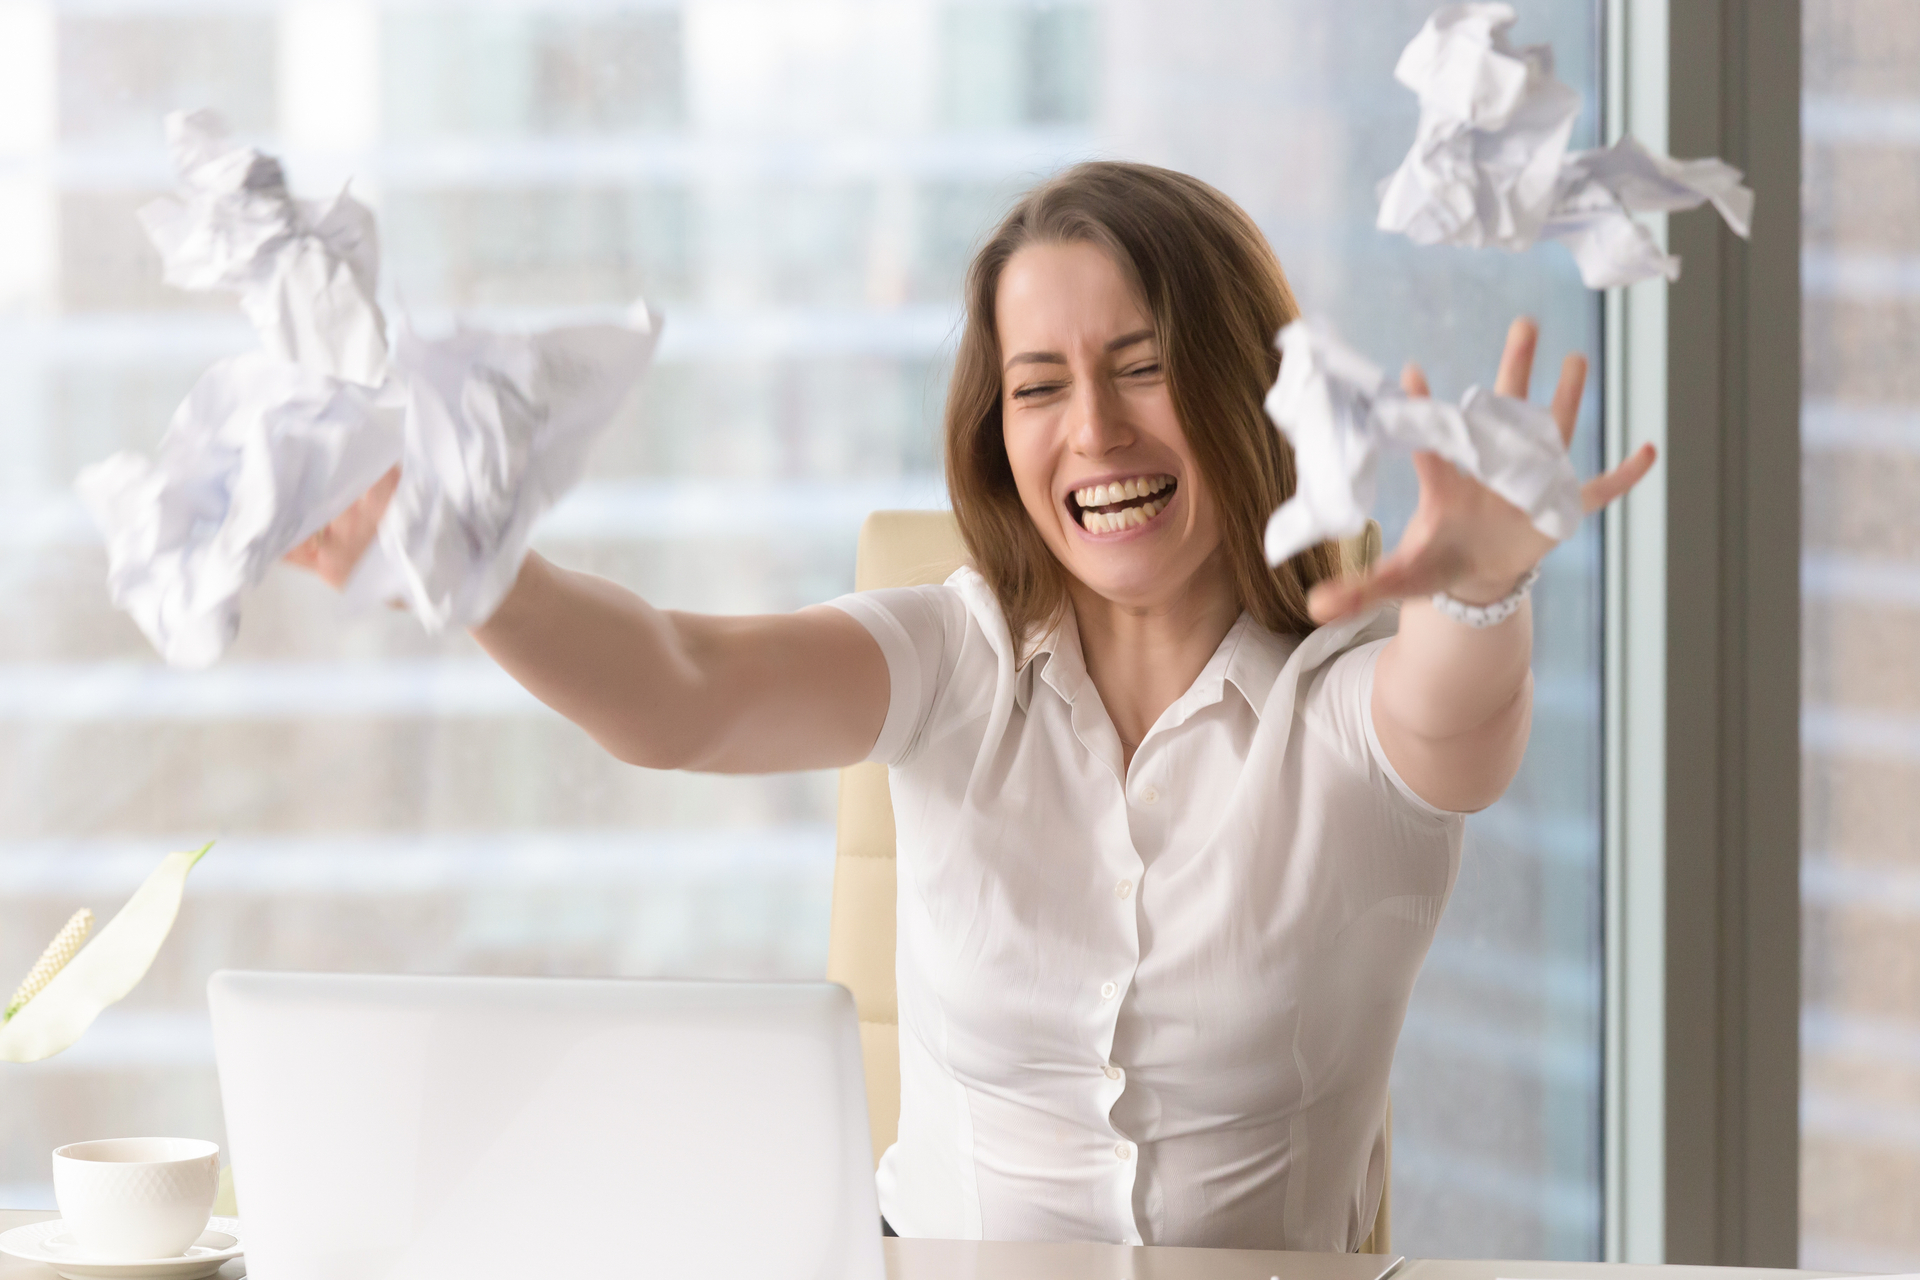 Furious businesswoman with wrathful face expression throwing crumbled papers